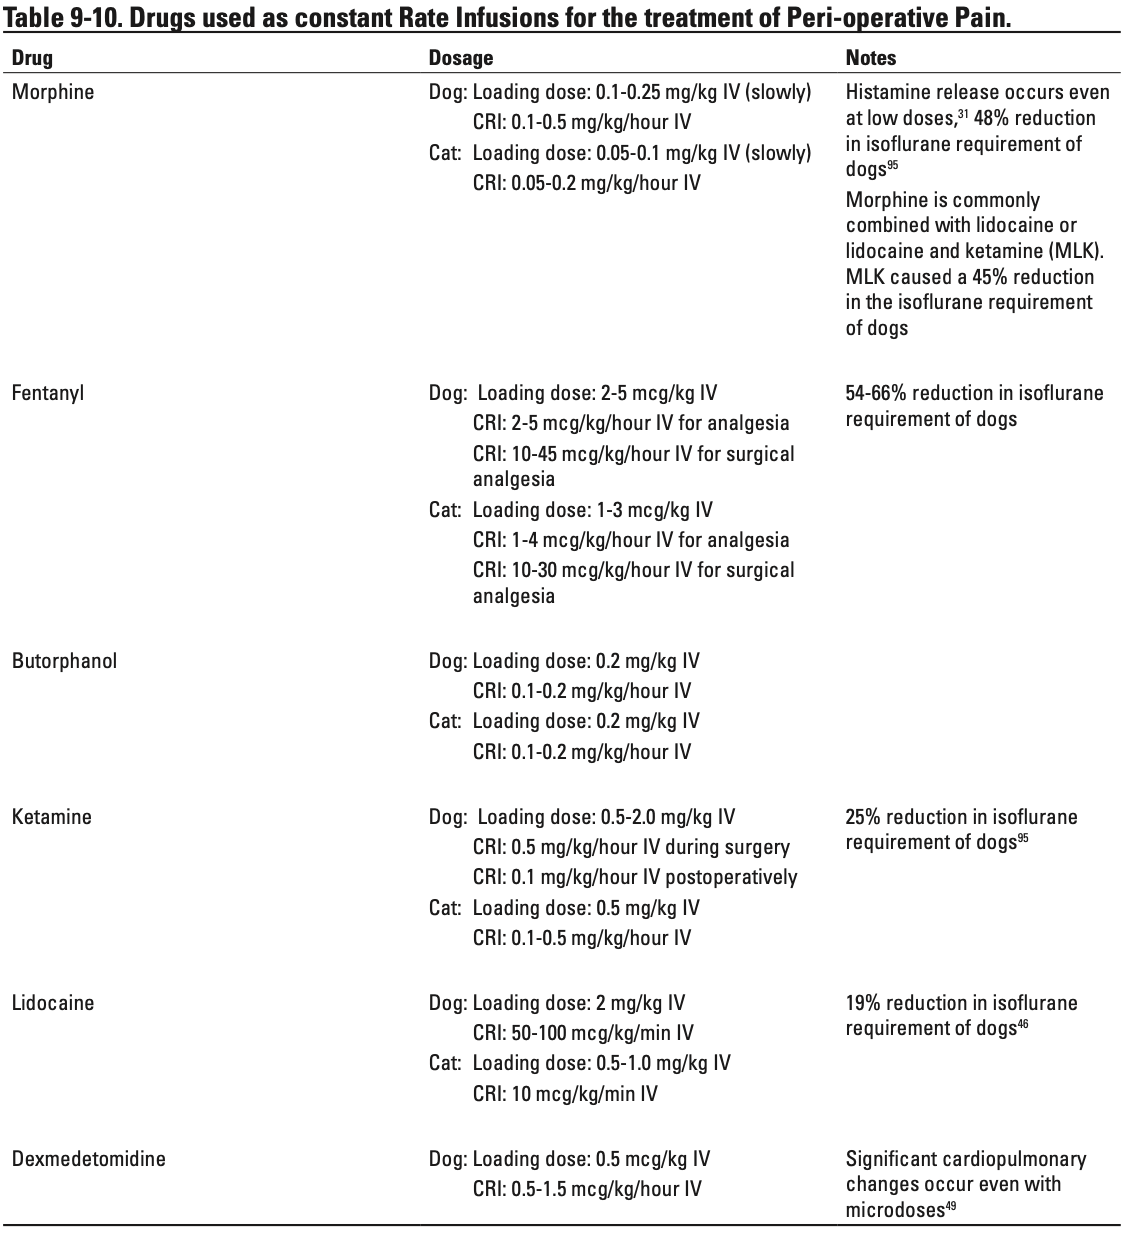 Table 9-10. Drugs used as constant Rate Infusions for the treatment of Peri-operative Pain.